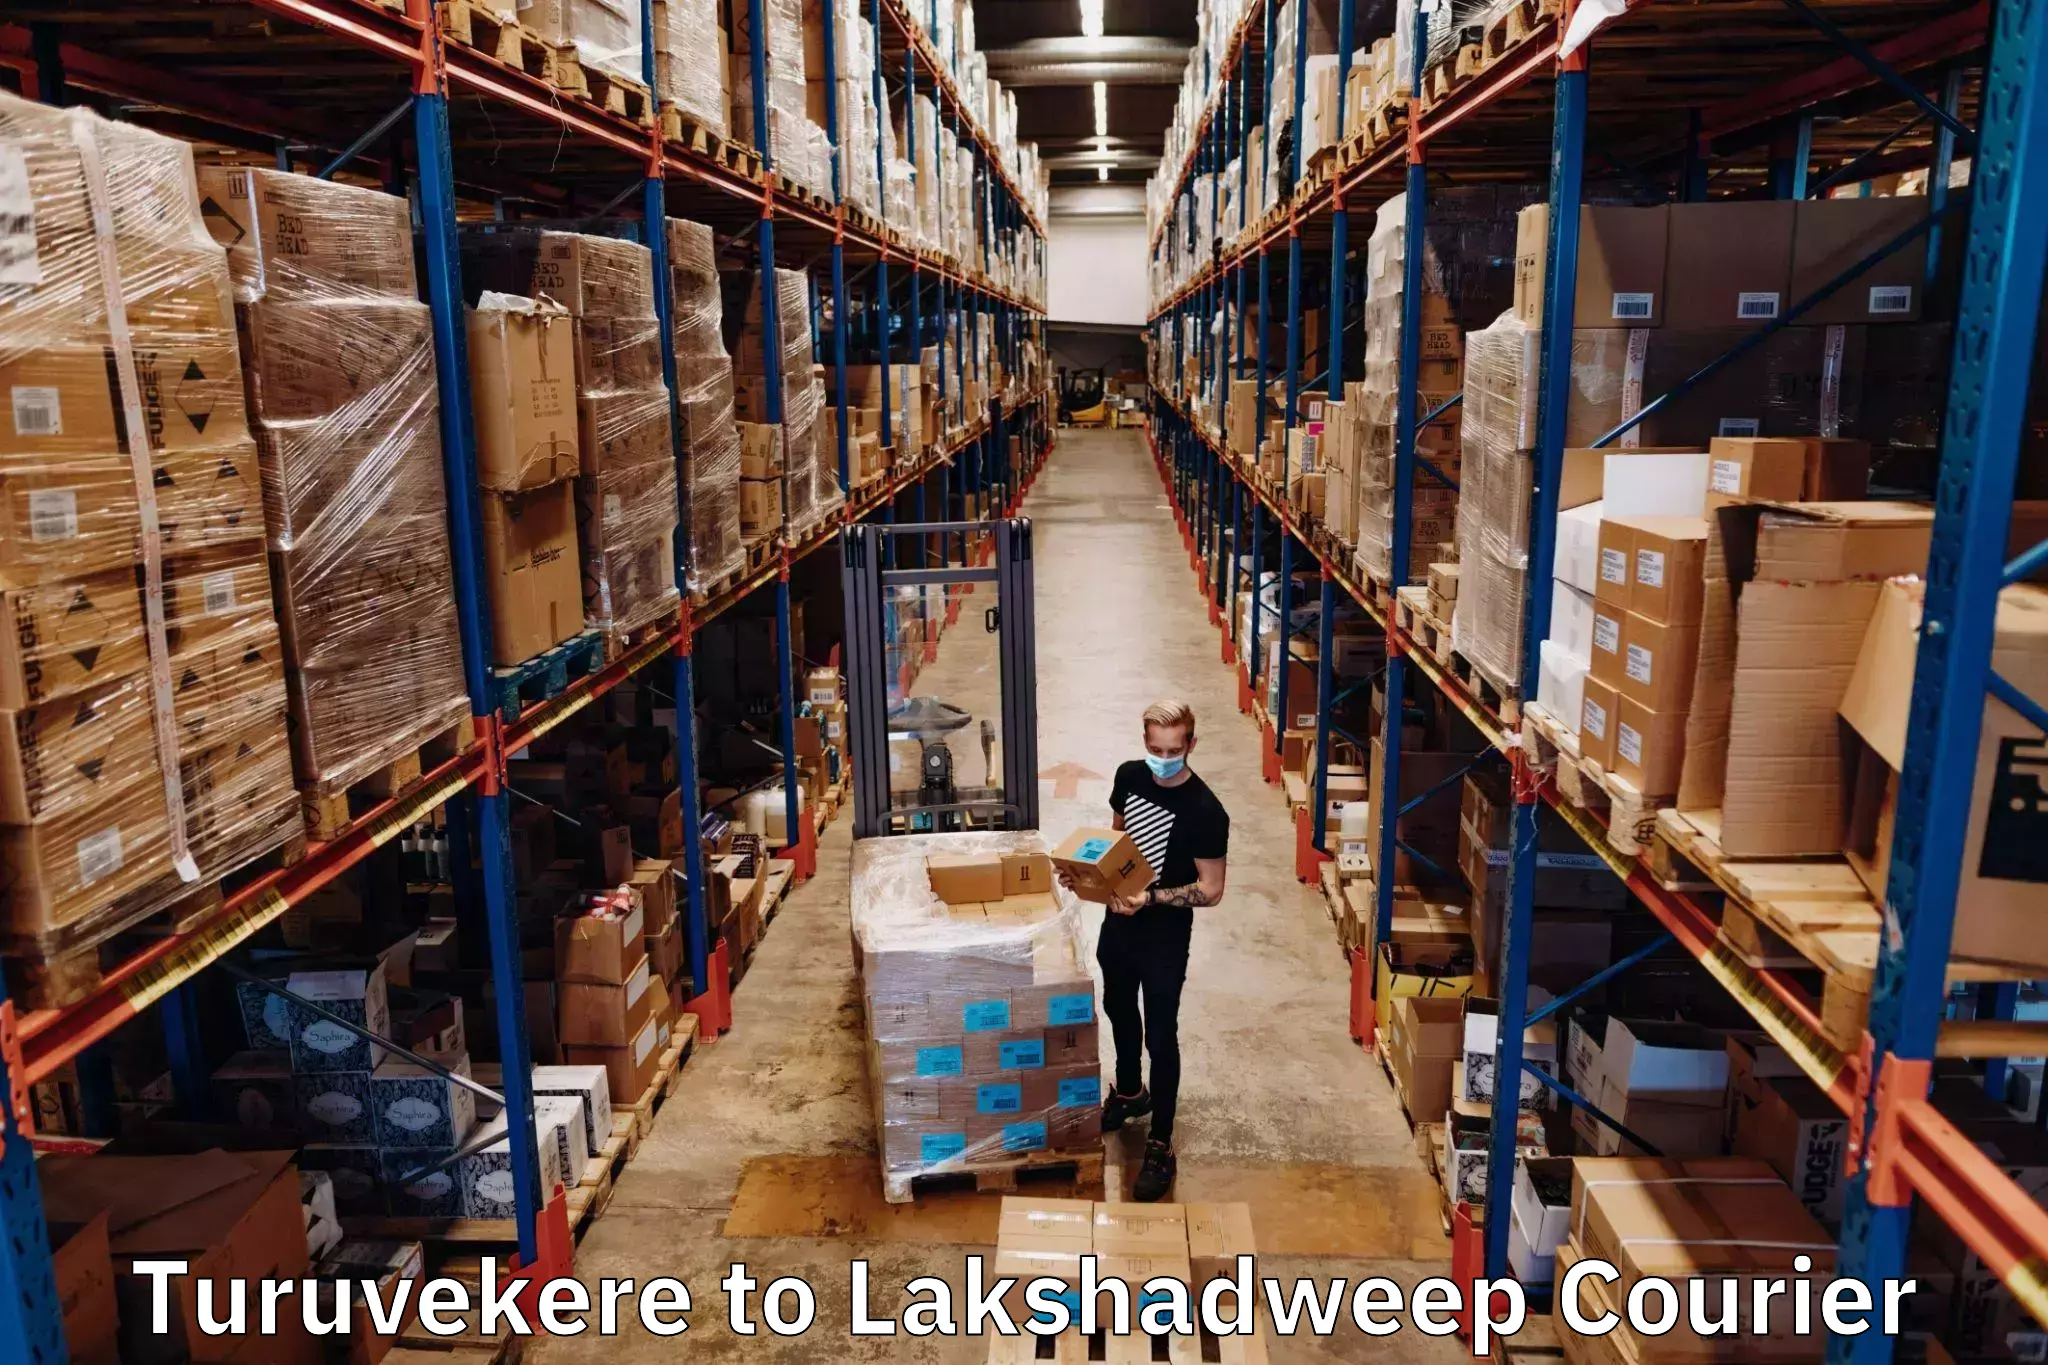 Courier rate comparison Turuvekere to Lakshadweep